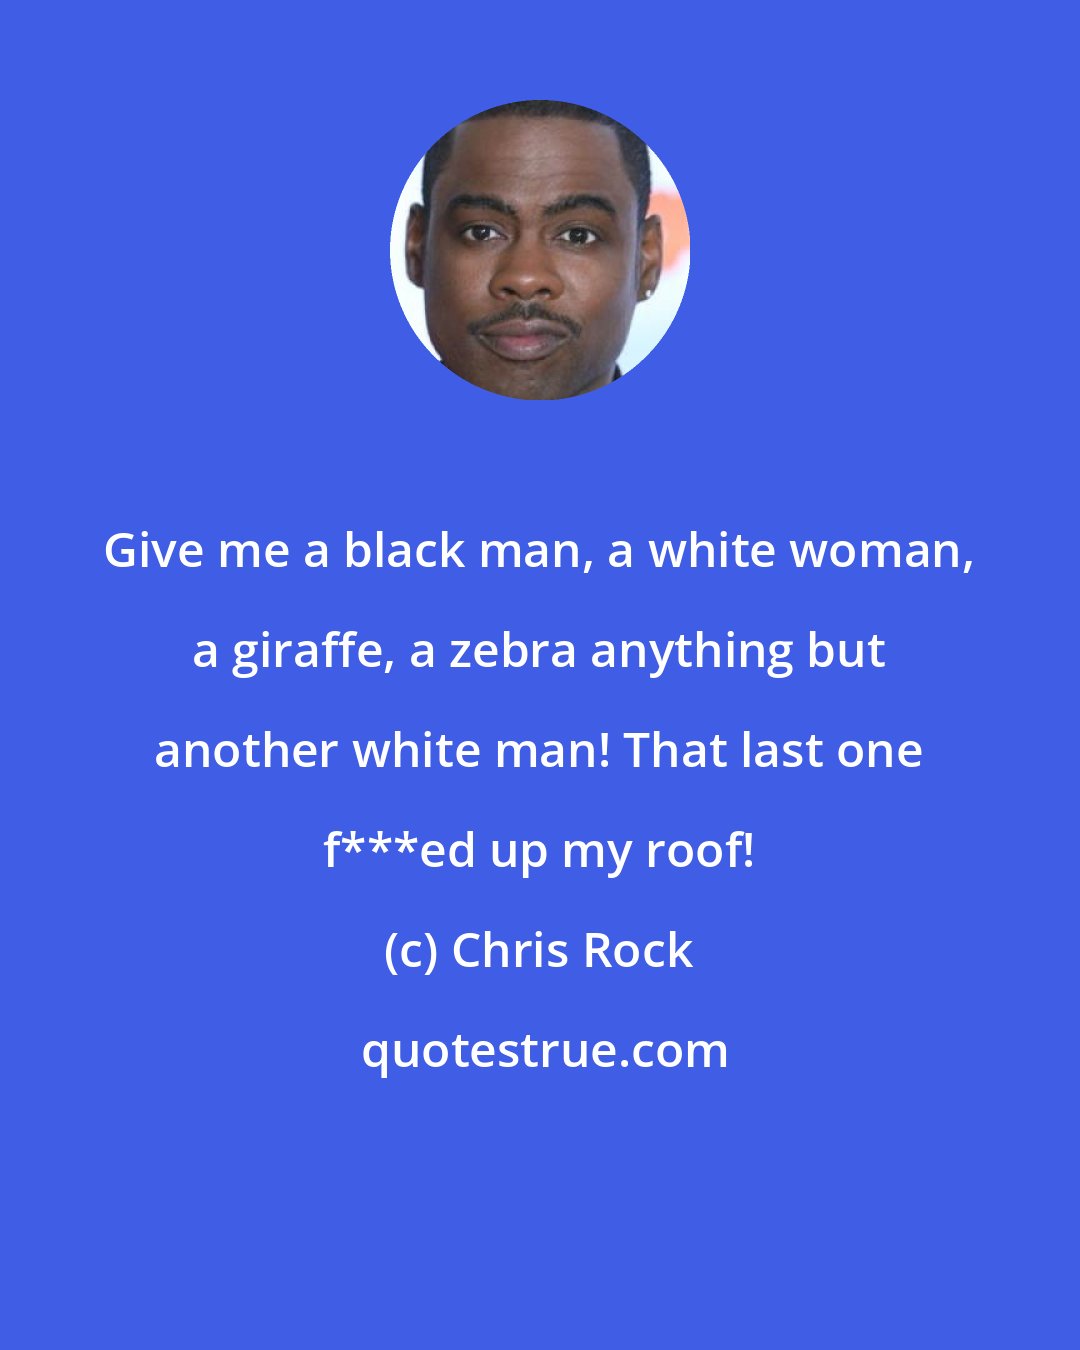 Chris Rock: Give me a black man, a white woman, a giraffe, a zebra anything but another white man! That last one f***ed up my roof!